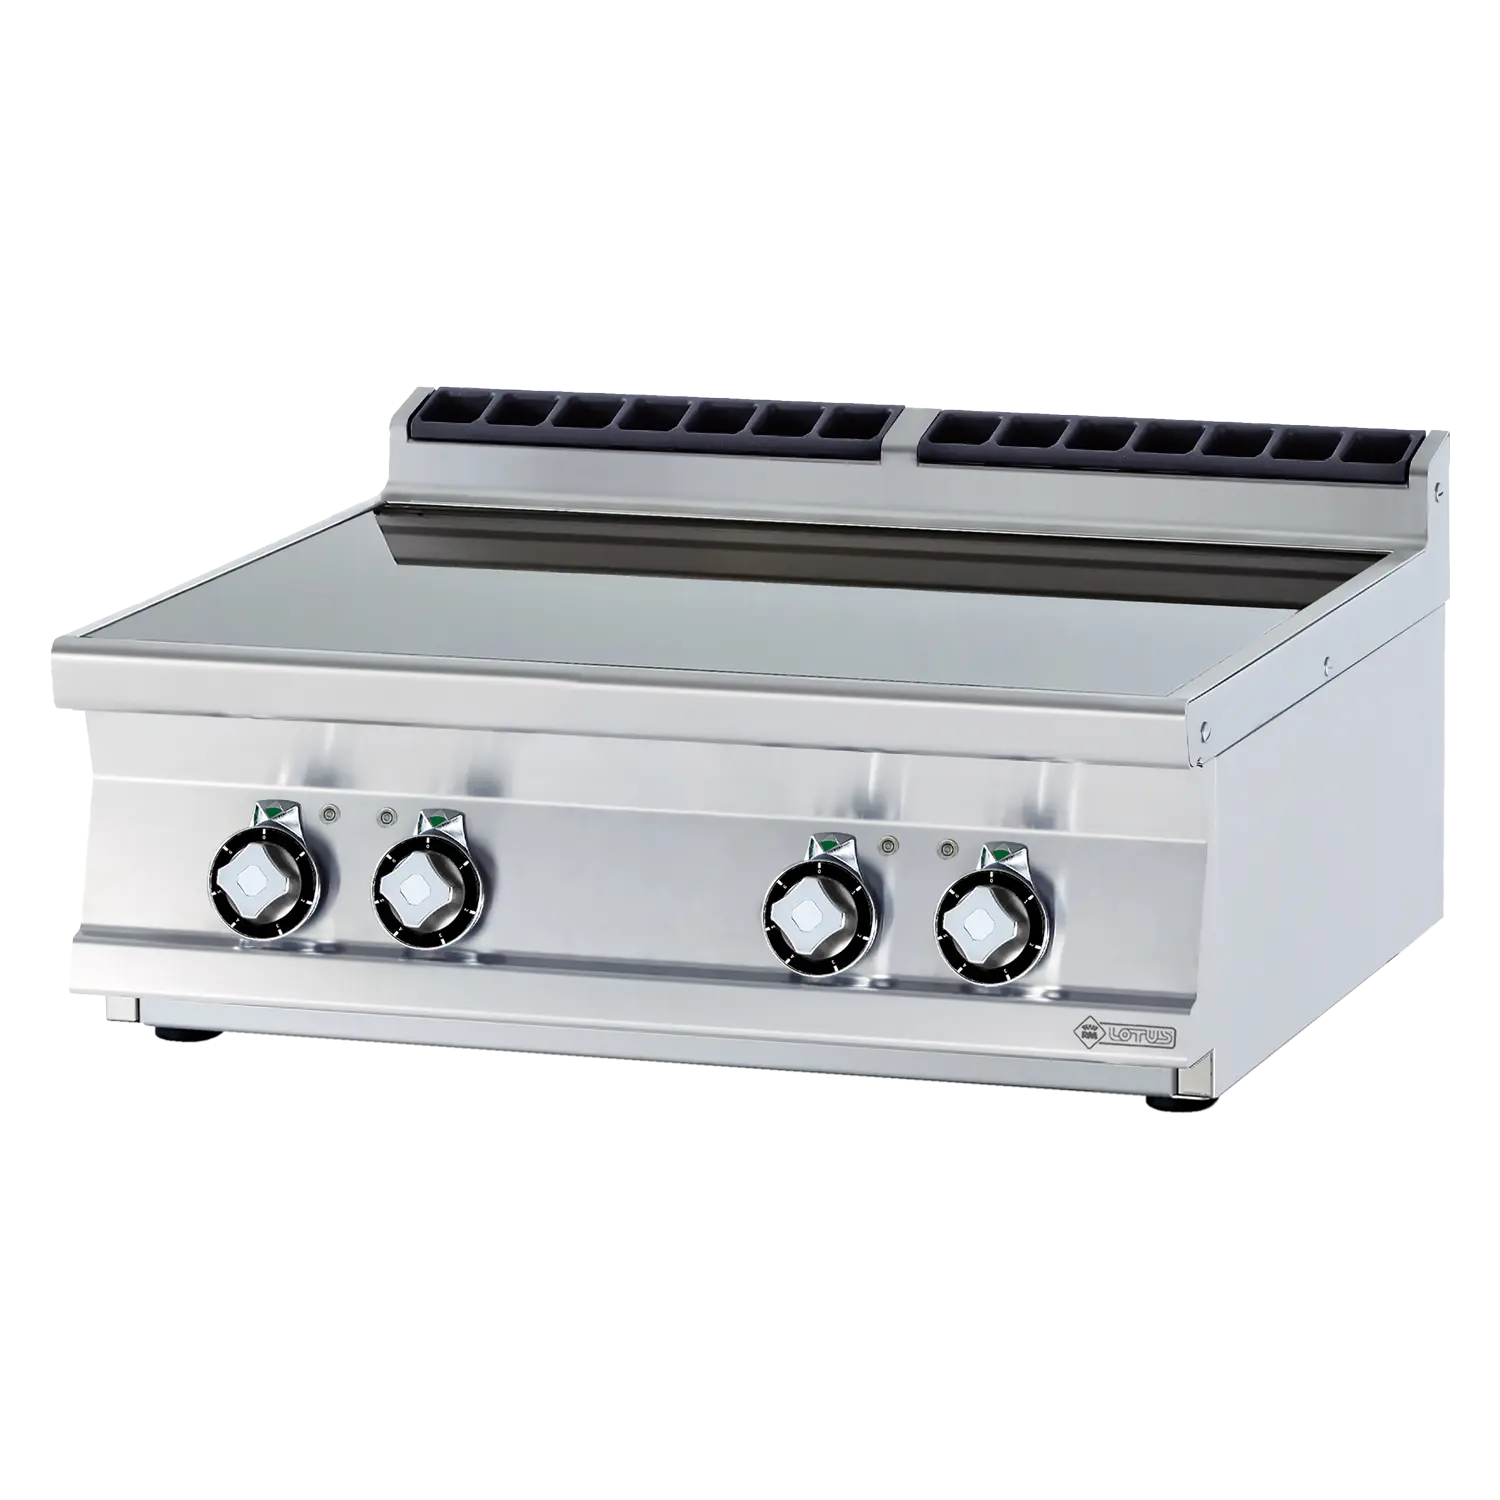 Cooking range glass ceramic electric 4x plate without cabinet 400 V | RM - PCCT-78ET